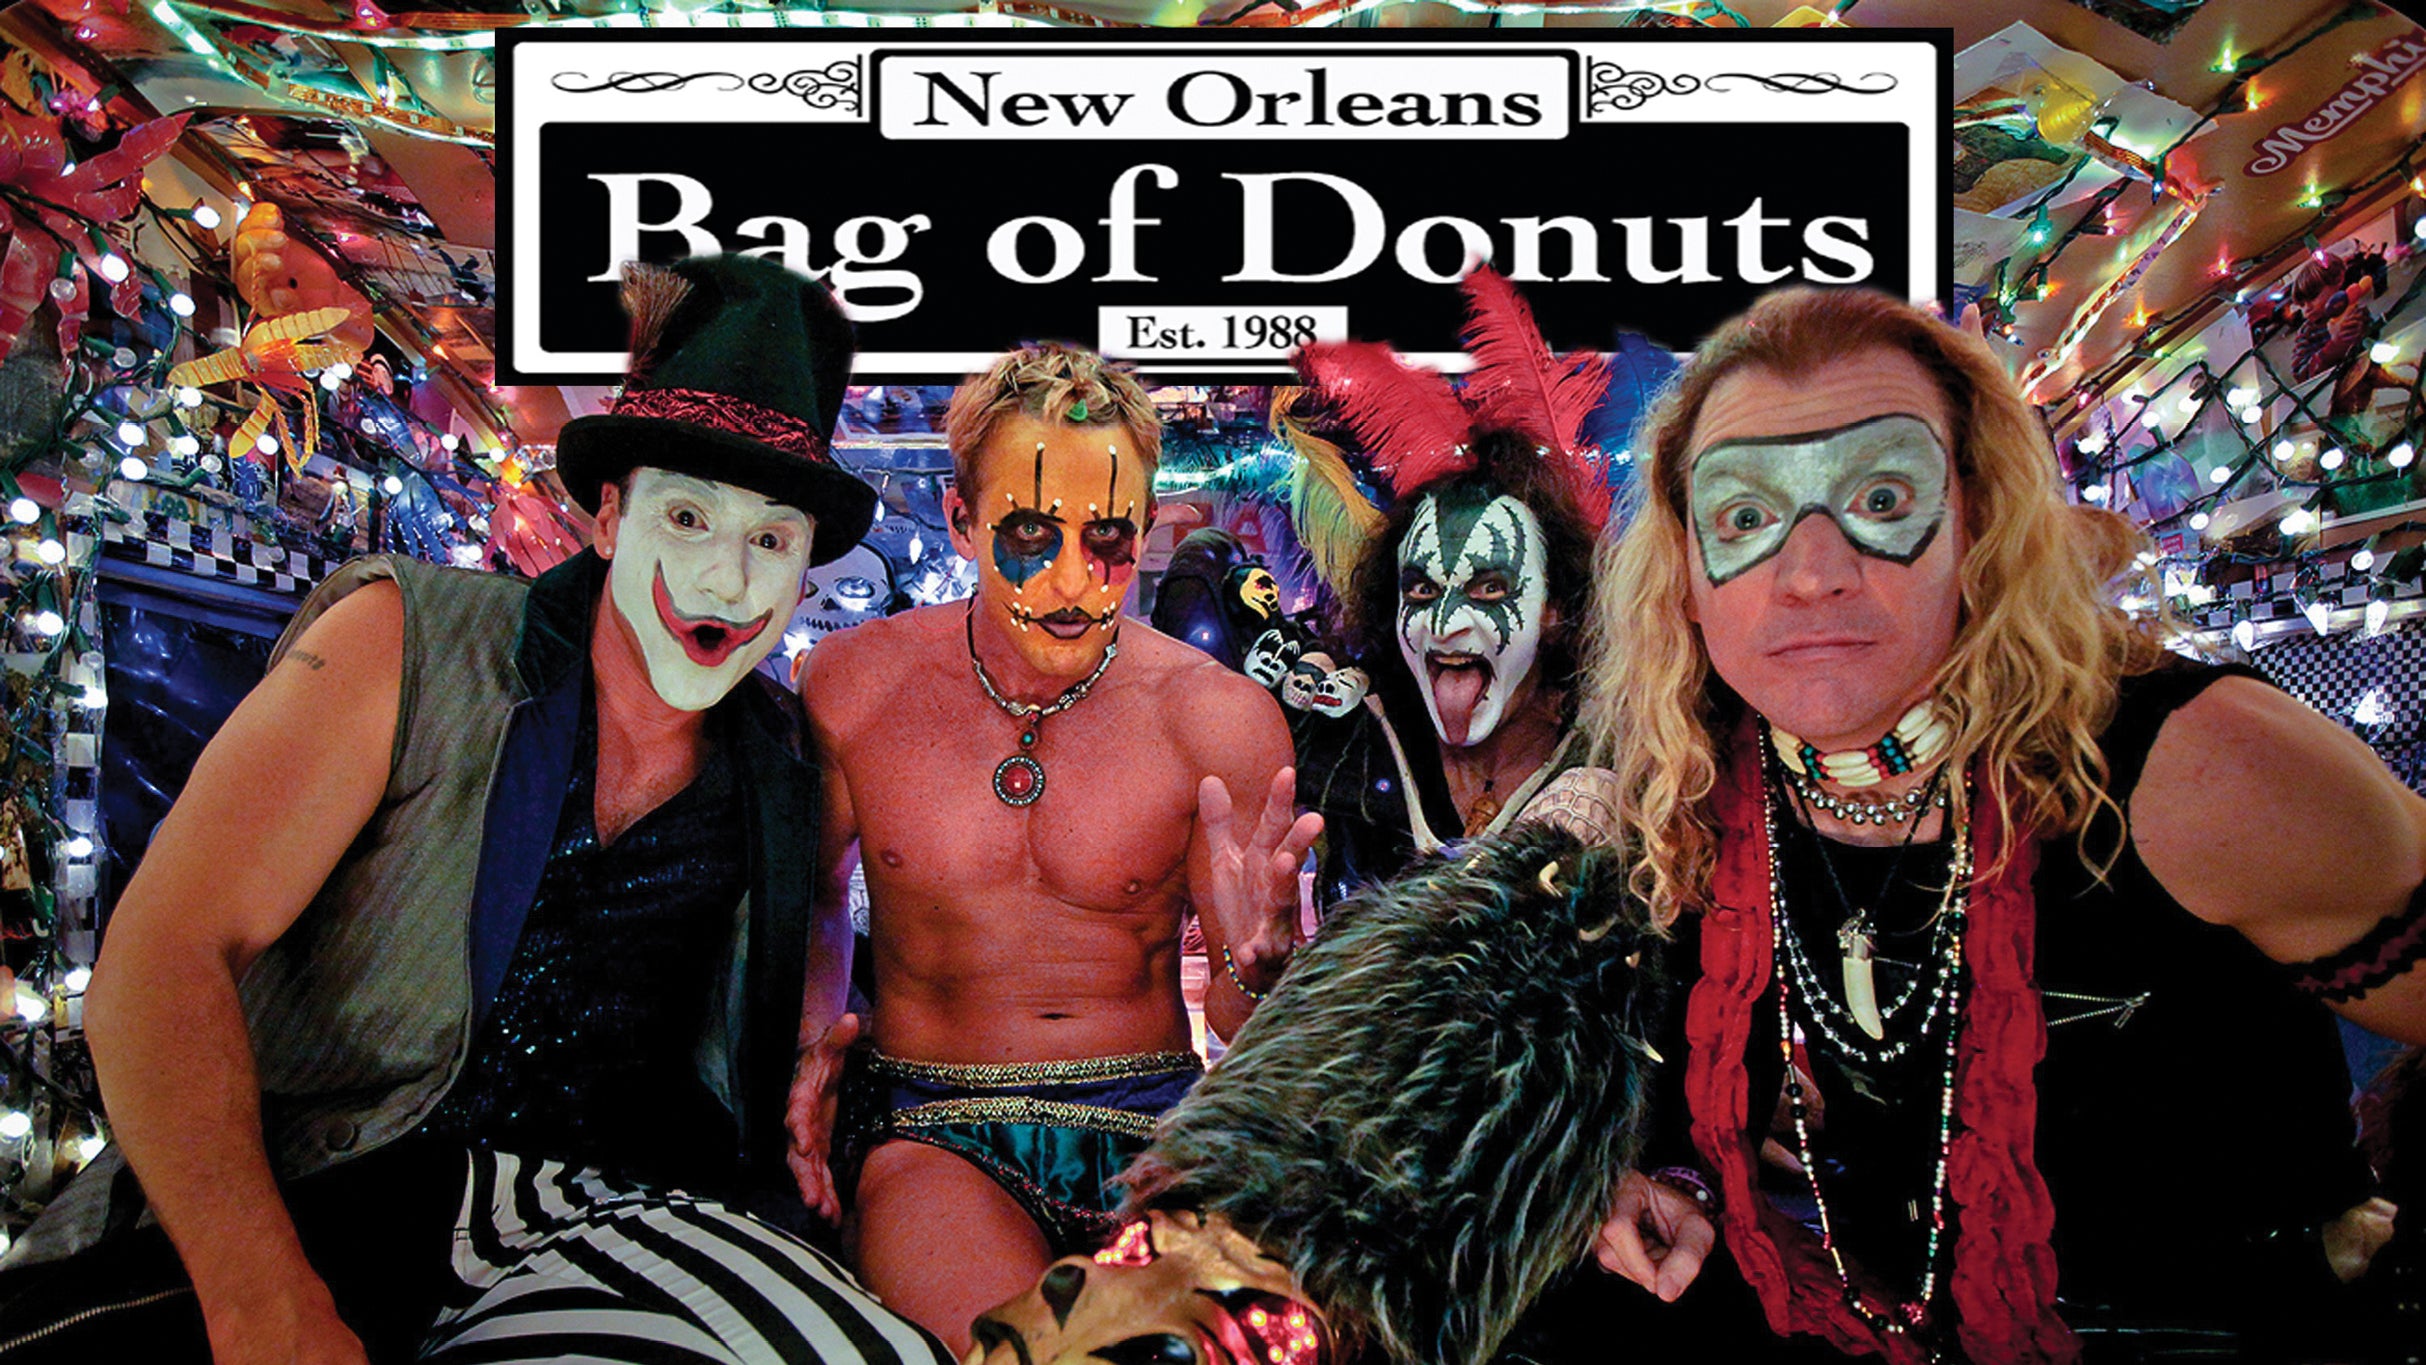 Bag of Donuts in Bay St. Louis promo photo for Ticketmaster presale offer code